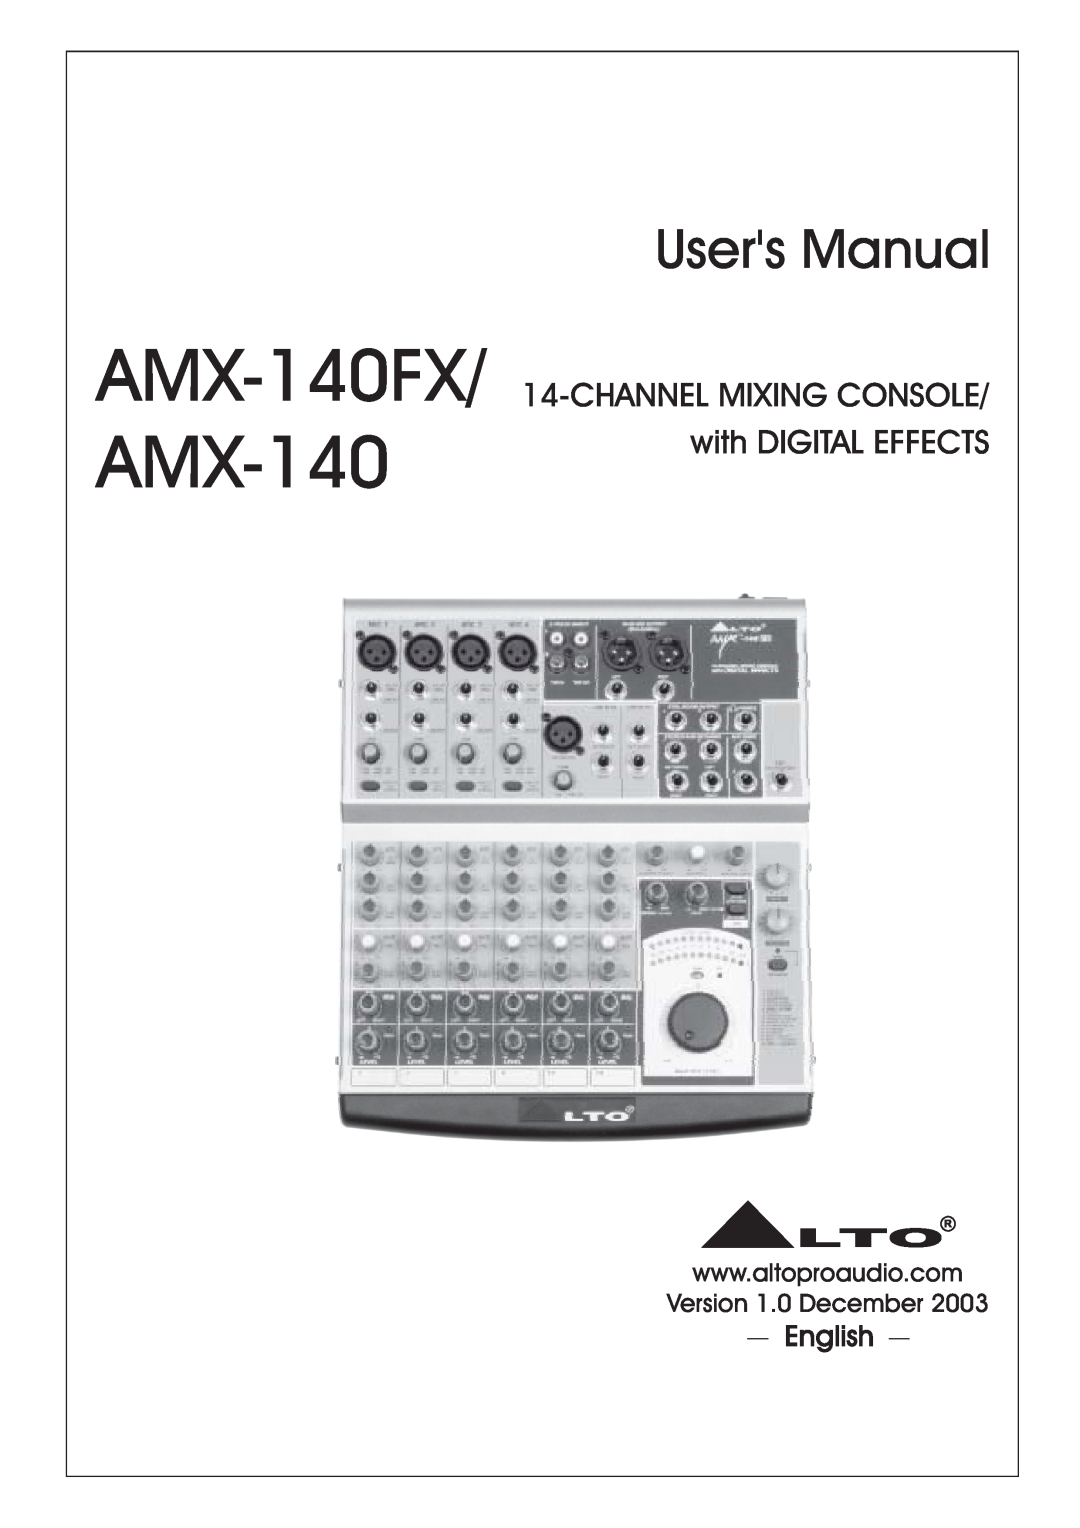 Nilfisk-ALTO user manual AMX-140FX/ AMX-140, CHANNELMIXING CONSOLE with DIGITAL EFFECTS, English 